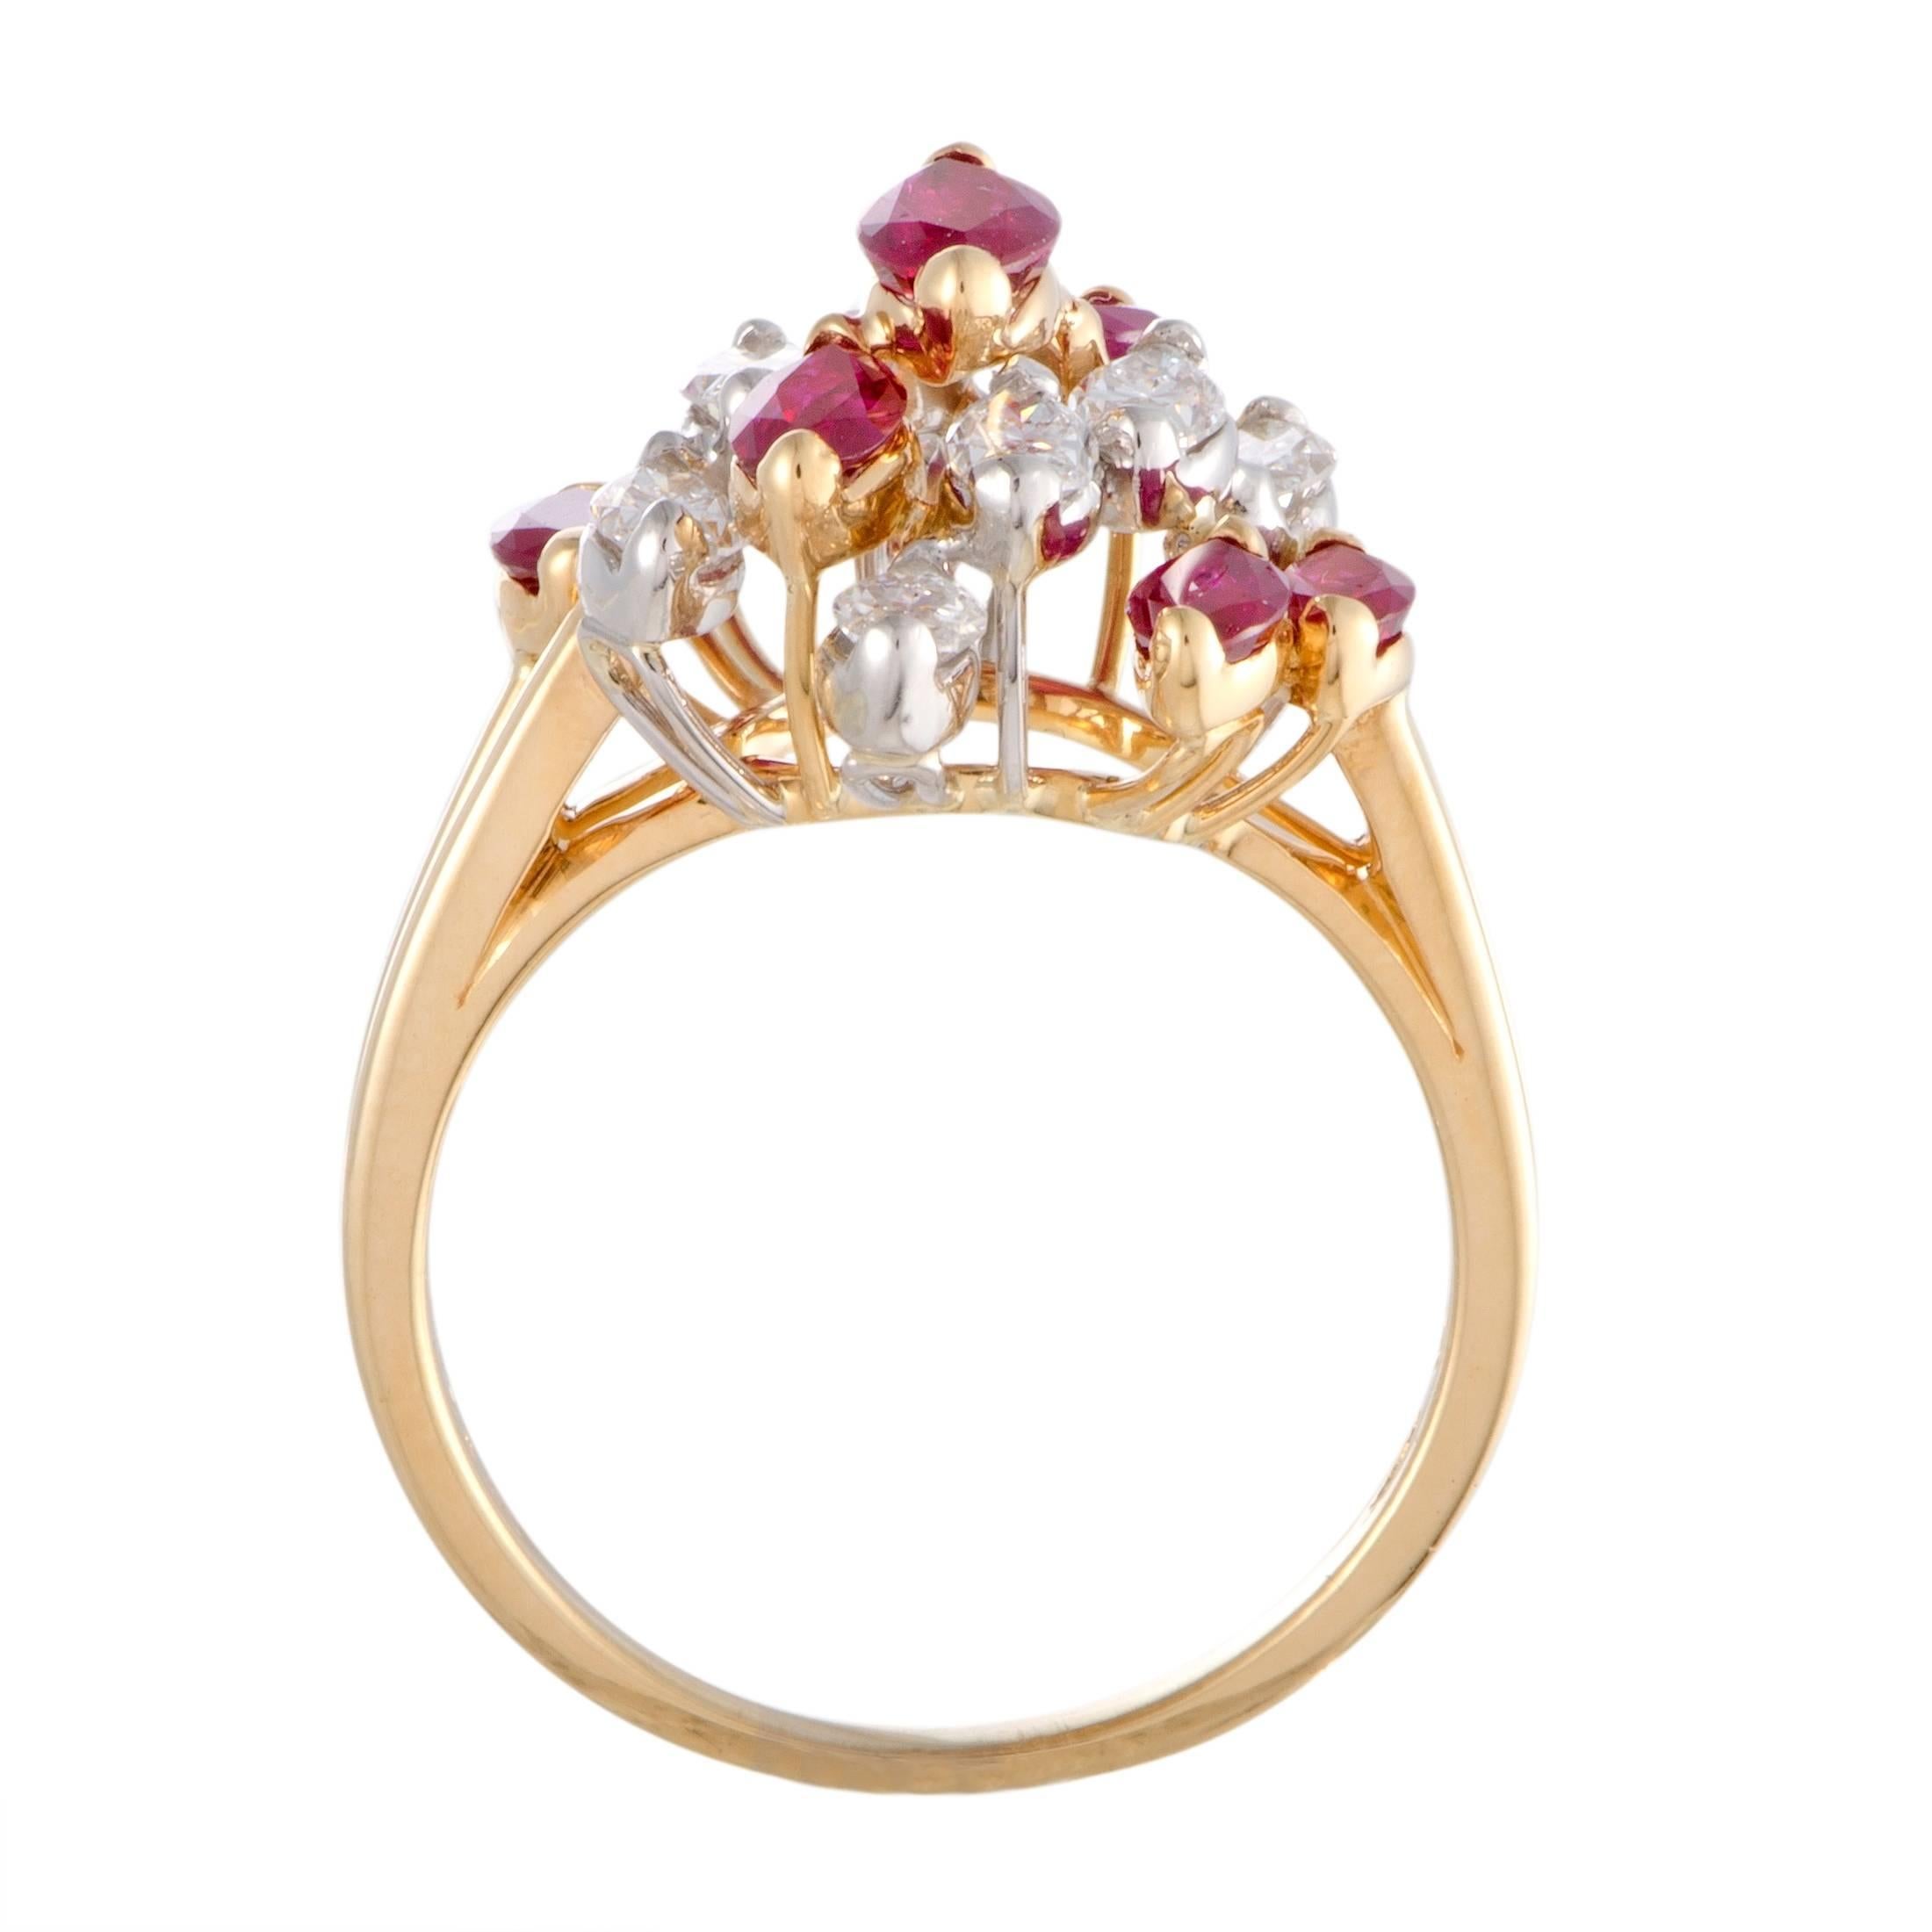 Intriguing with their astonishing cut and fascinating manner of arrangement, the passionate rubies amounting to 1.50 carats and the scintillating diamonds weighing in total 1.20 carats produce a spellbinding and memorable sight in this sumptuous 18K